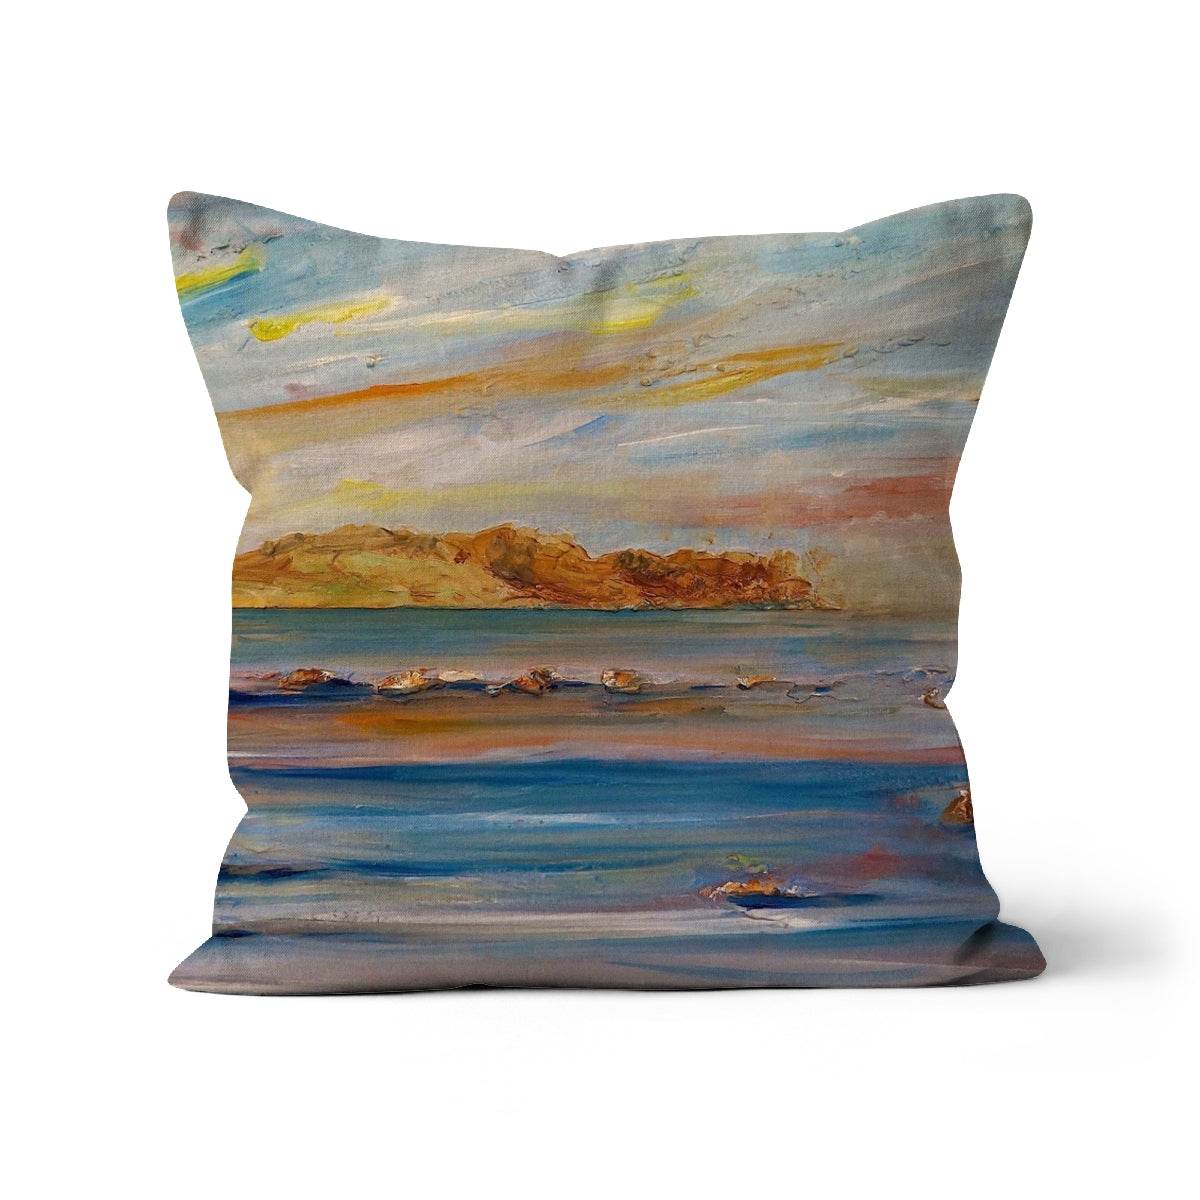 Tiree Dawn Art Gifts Cushion-Cushions-Hebridean Islands Art Gallery-Faux Suede-12"x12"-Paintings, Prints, Homeware, Art Gifts From Scotland By Scottish Artist Kevin Hunter